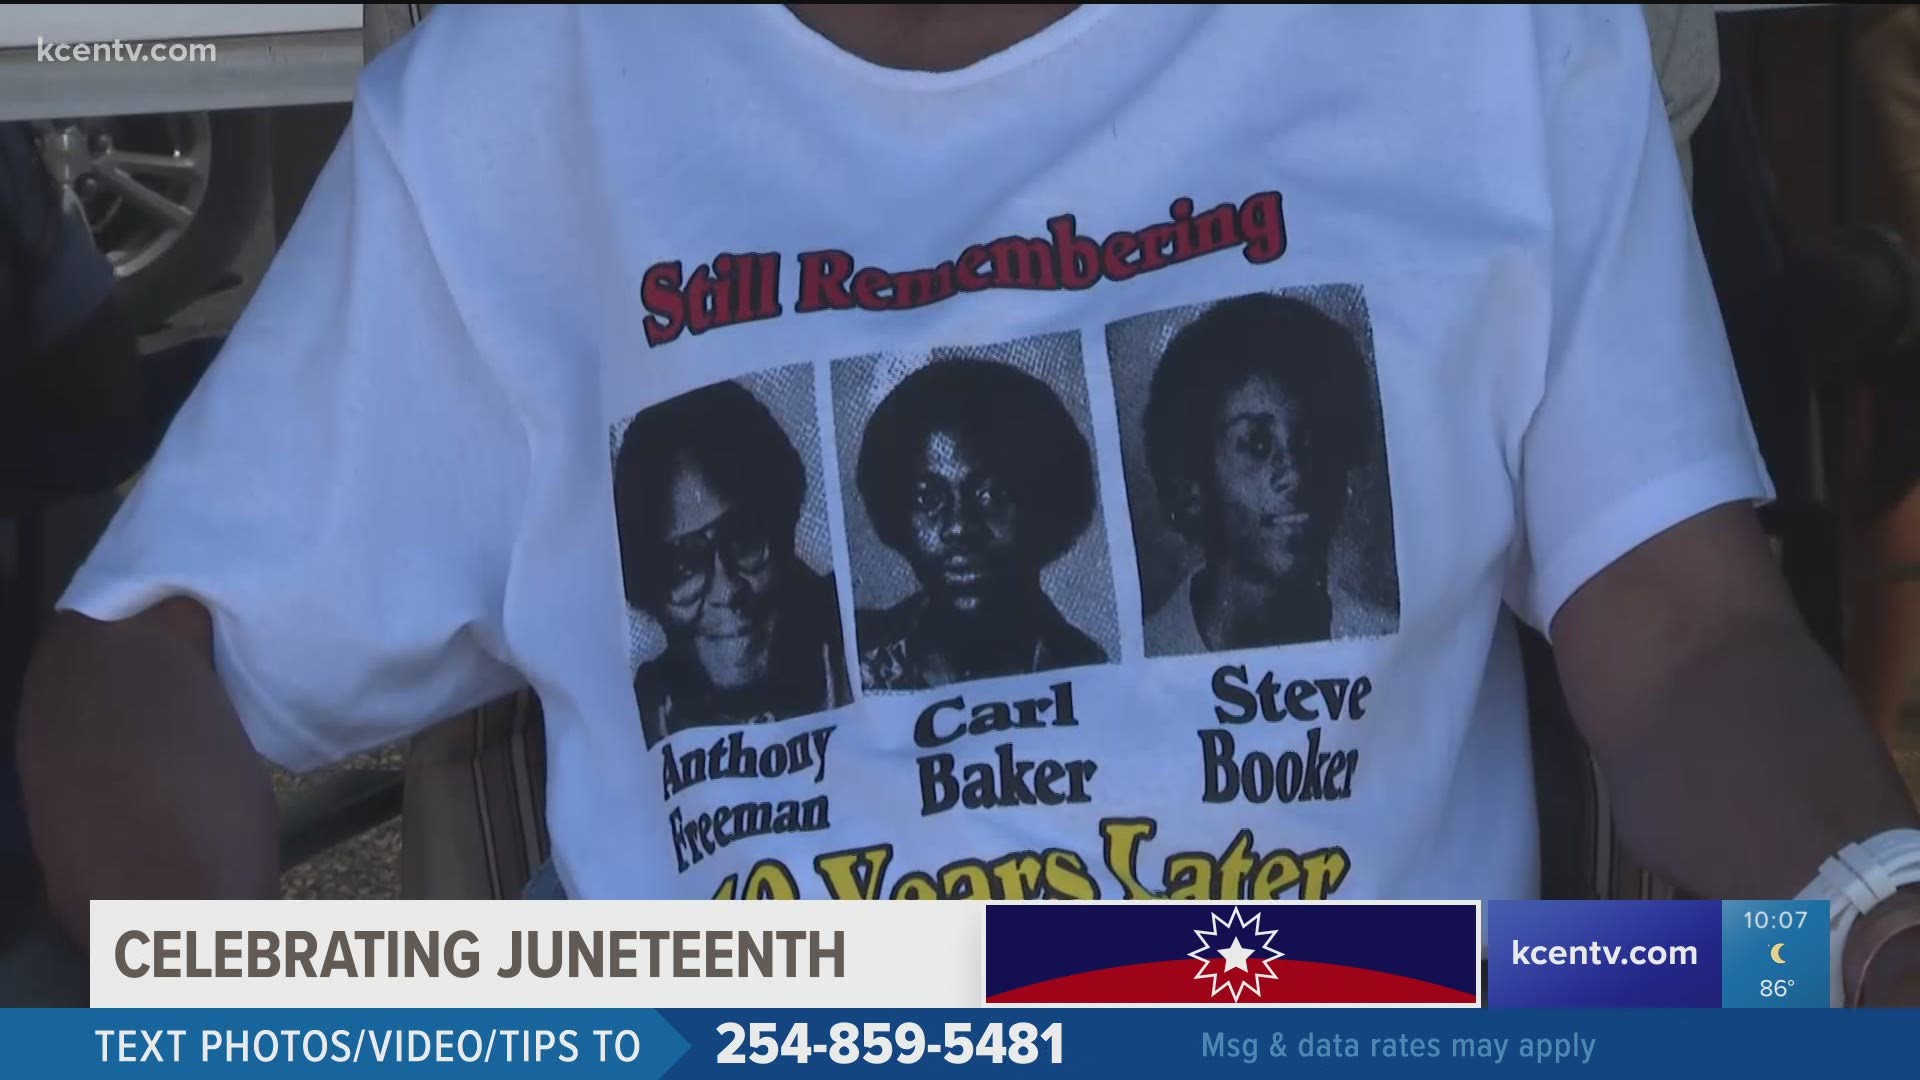 This year is the 40th-year remembrance of the three teenagers who drowned to death while handcuffed on a police boat.